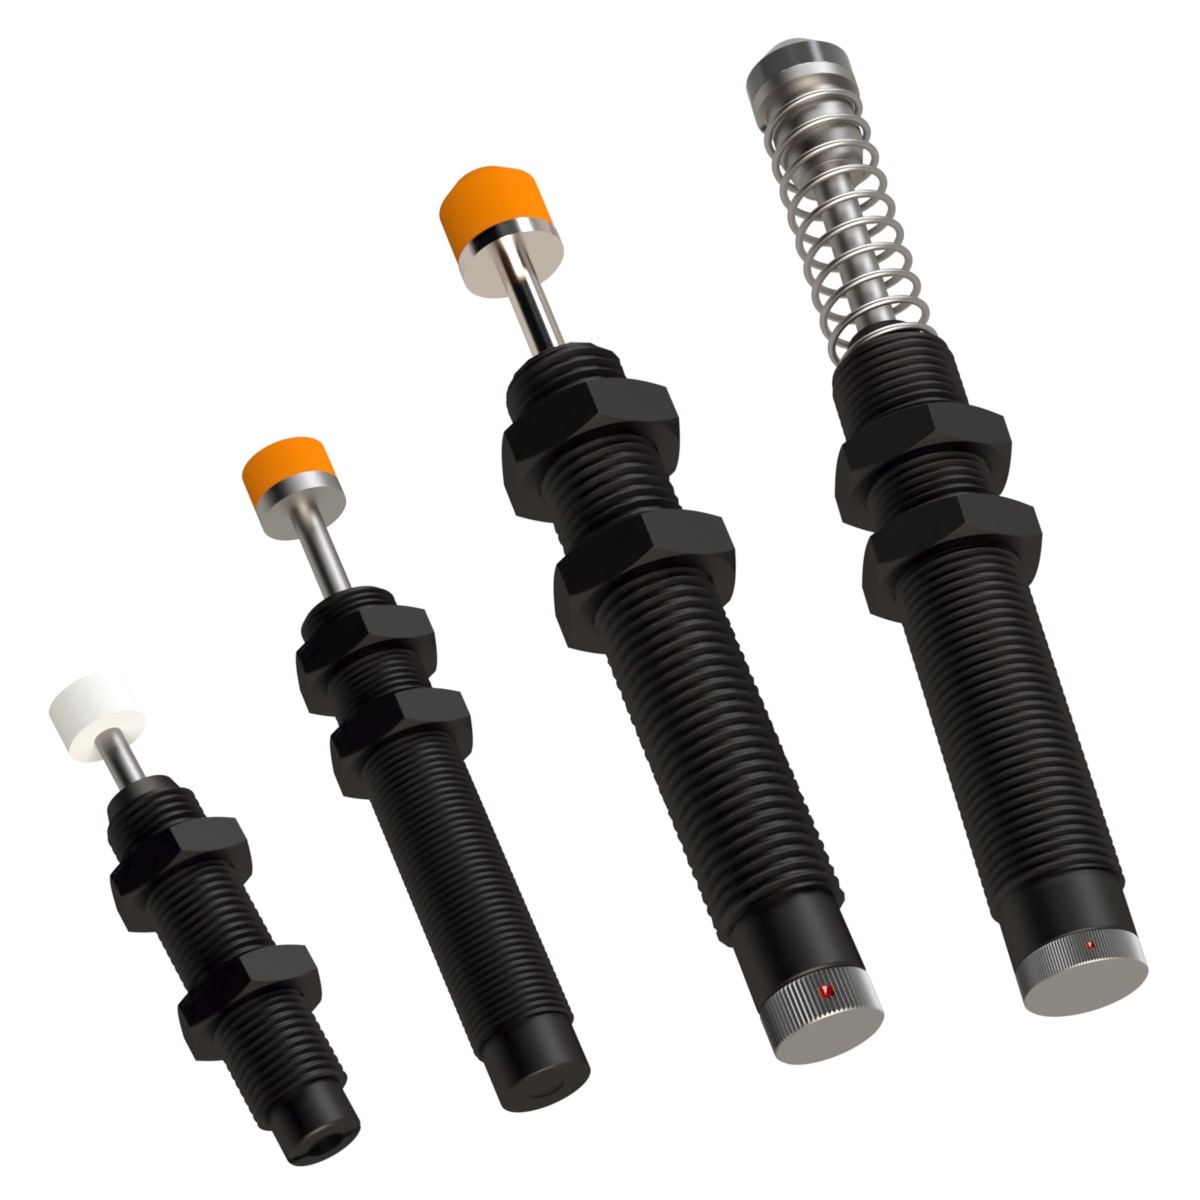 Industrial shock absorbers work by driving a piston into an oil-filled chamber and forcing the oil out through a relatively small orifice to provide a cushioning effect.